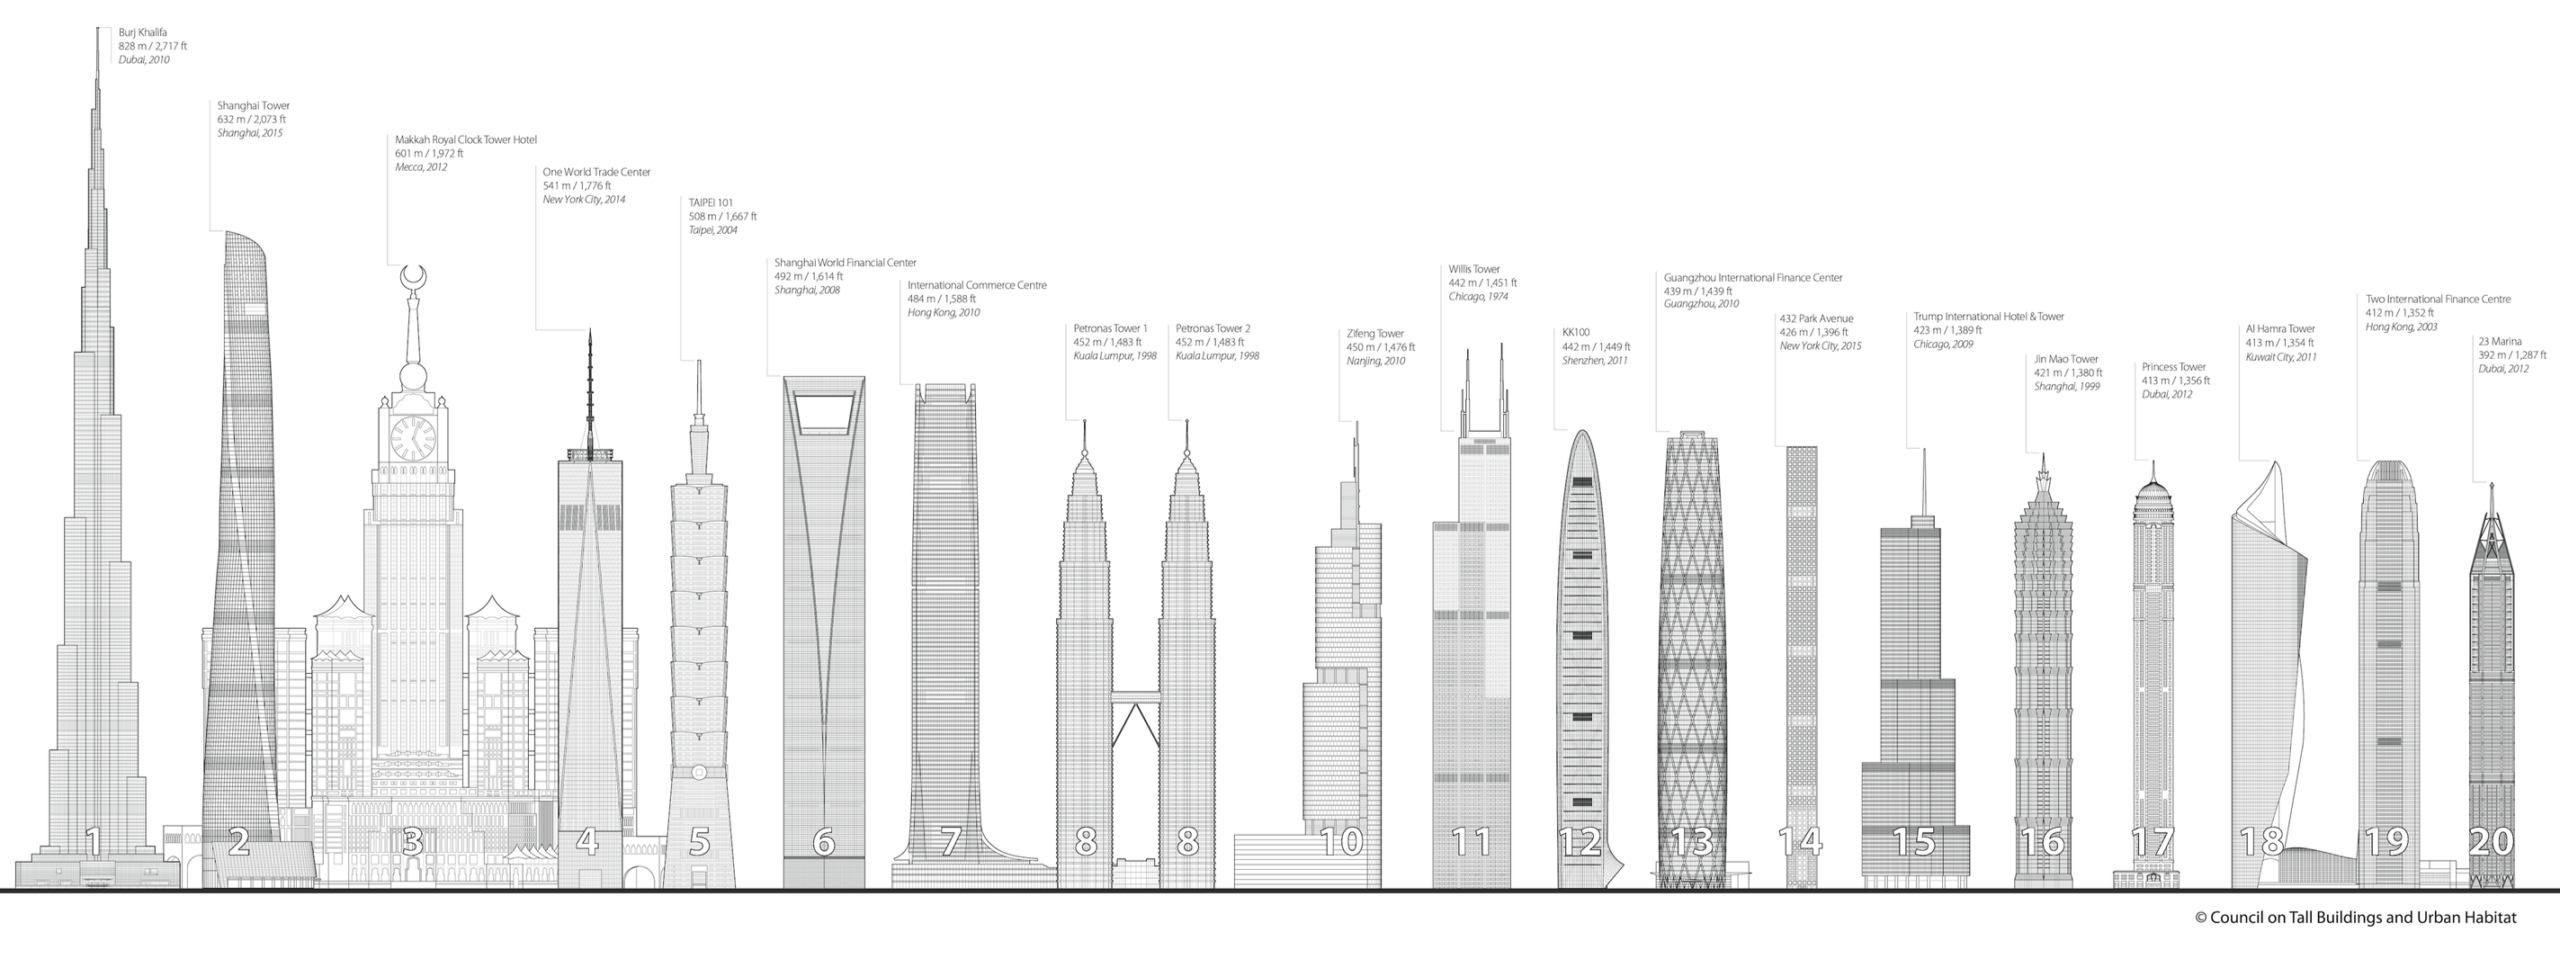 Charles Keasing Objector Etna The 50 Tallest Buildings in the World 2022 | ArchEyes